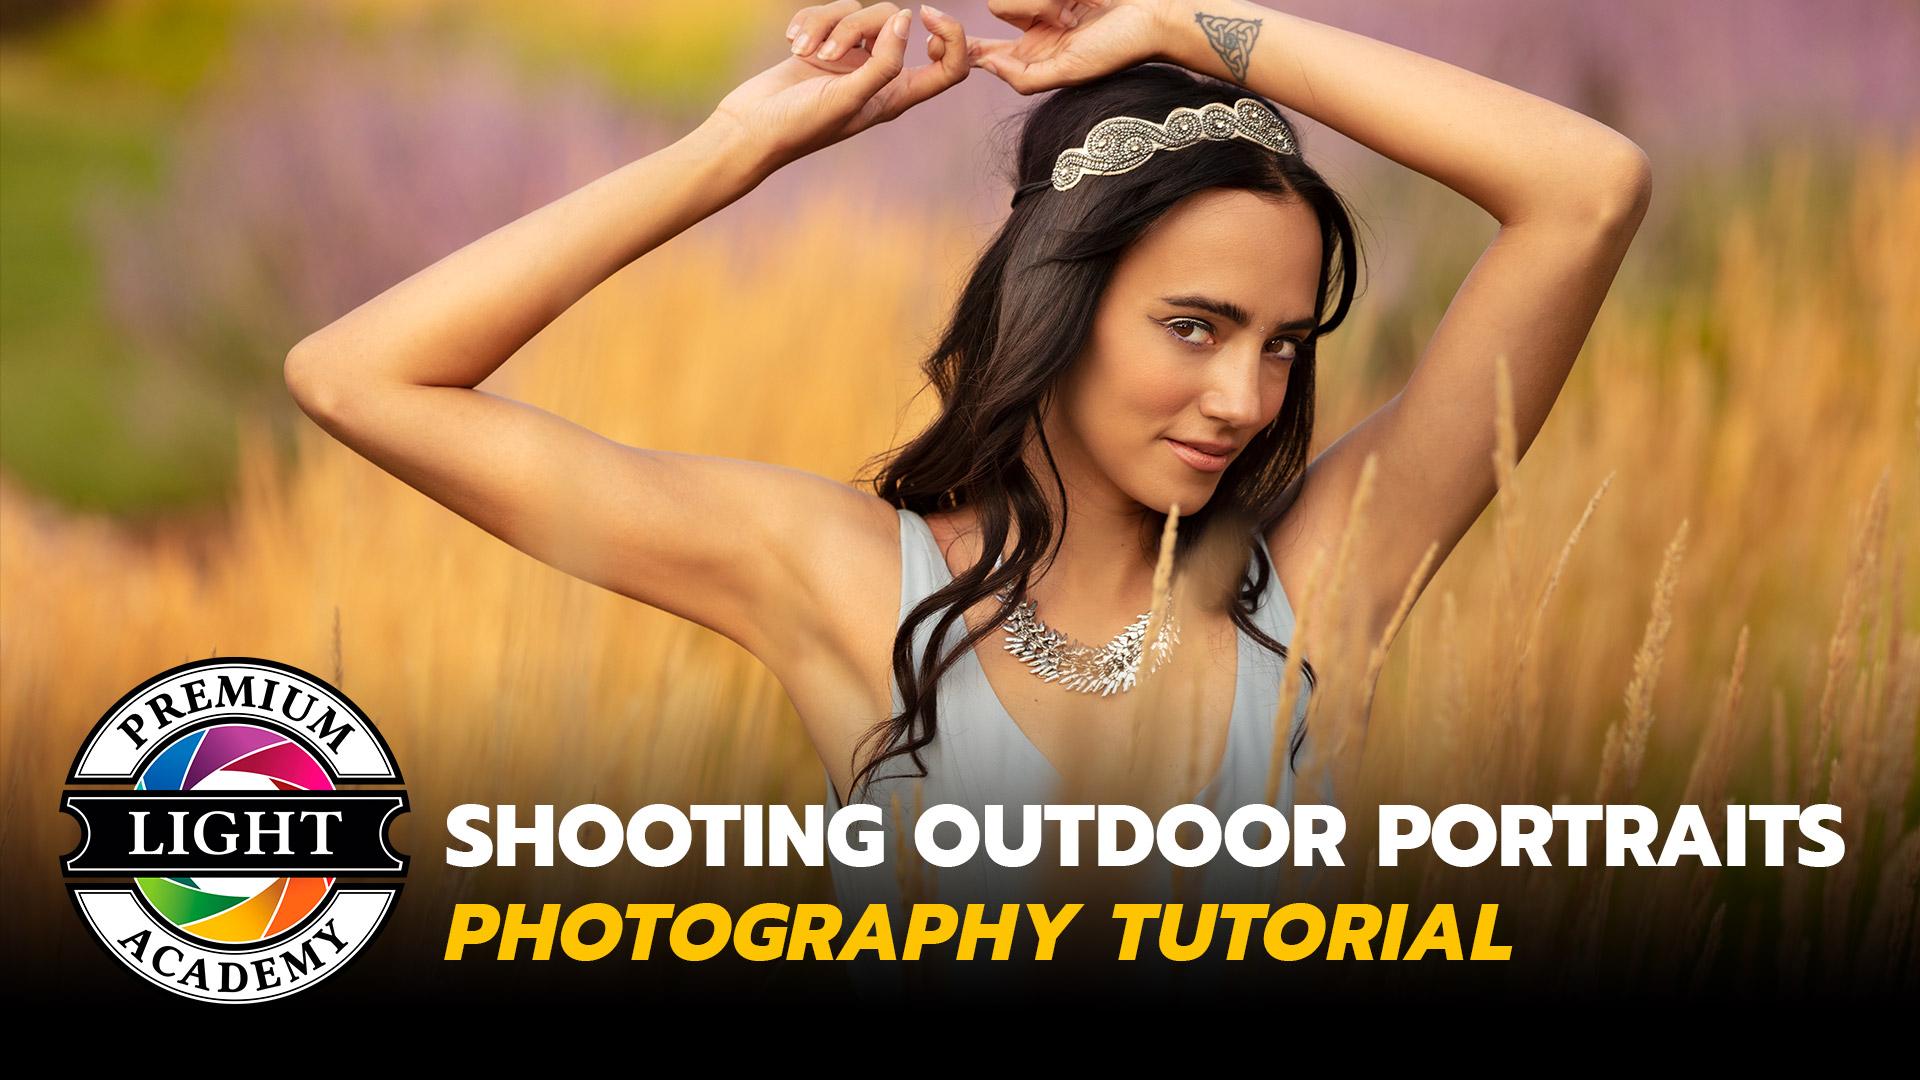 Shooting Outdoor Portraits by Premium Light Academy